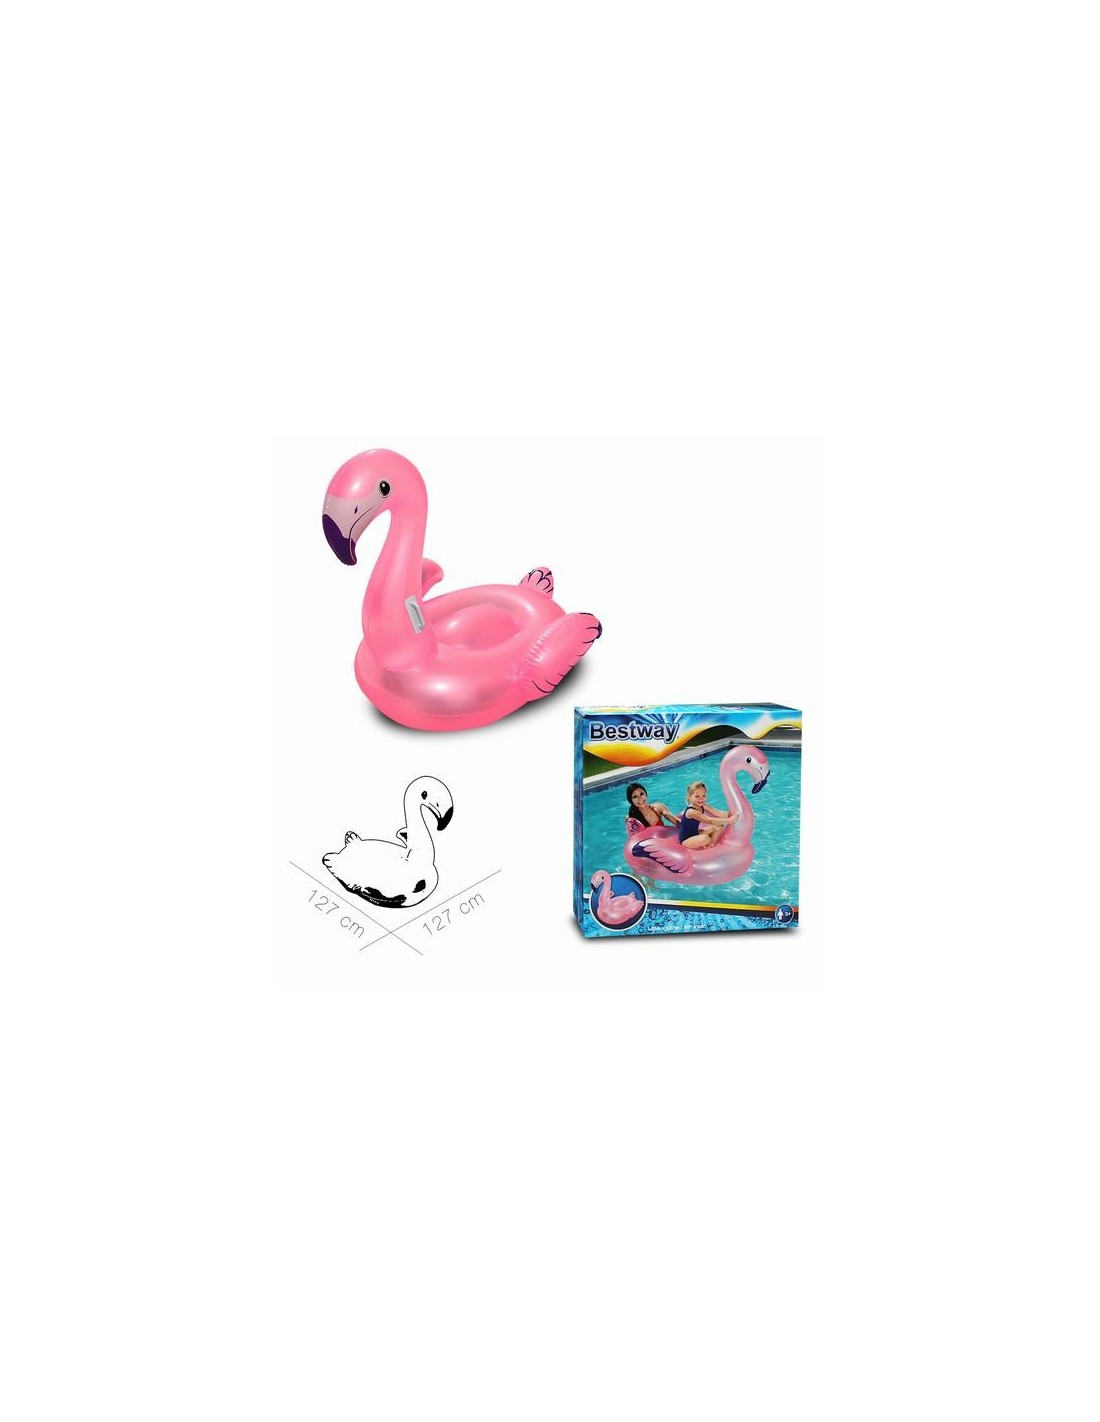 DIFFUSION 548030 Frite gonflable flamant rose - 27 x 15 x H.98 cm